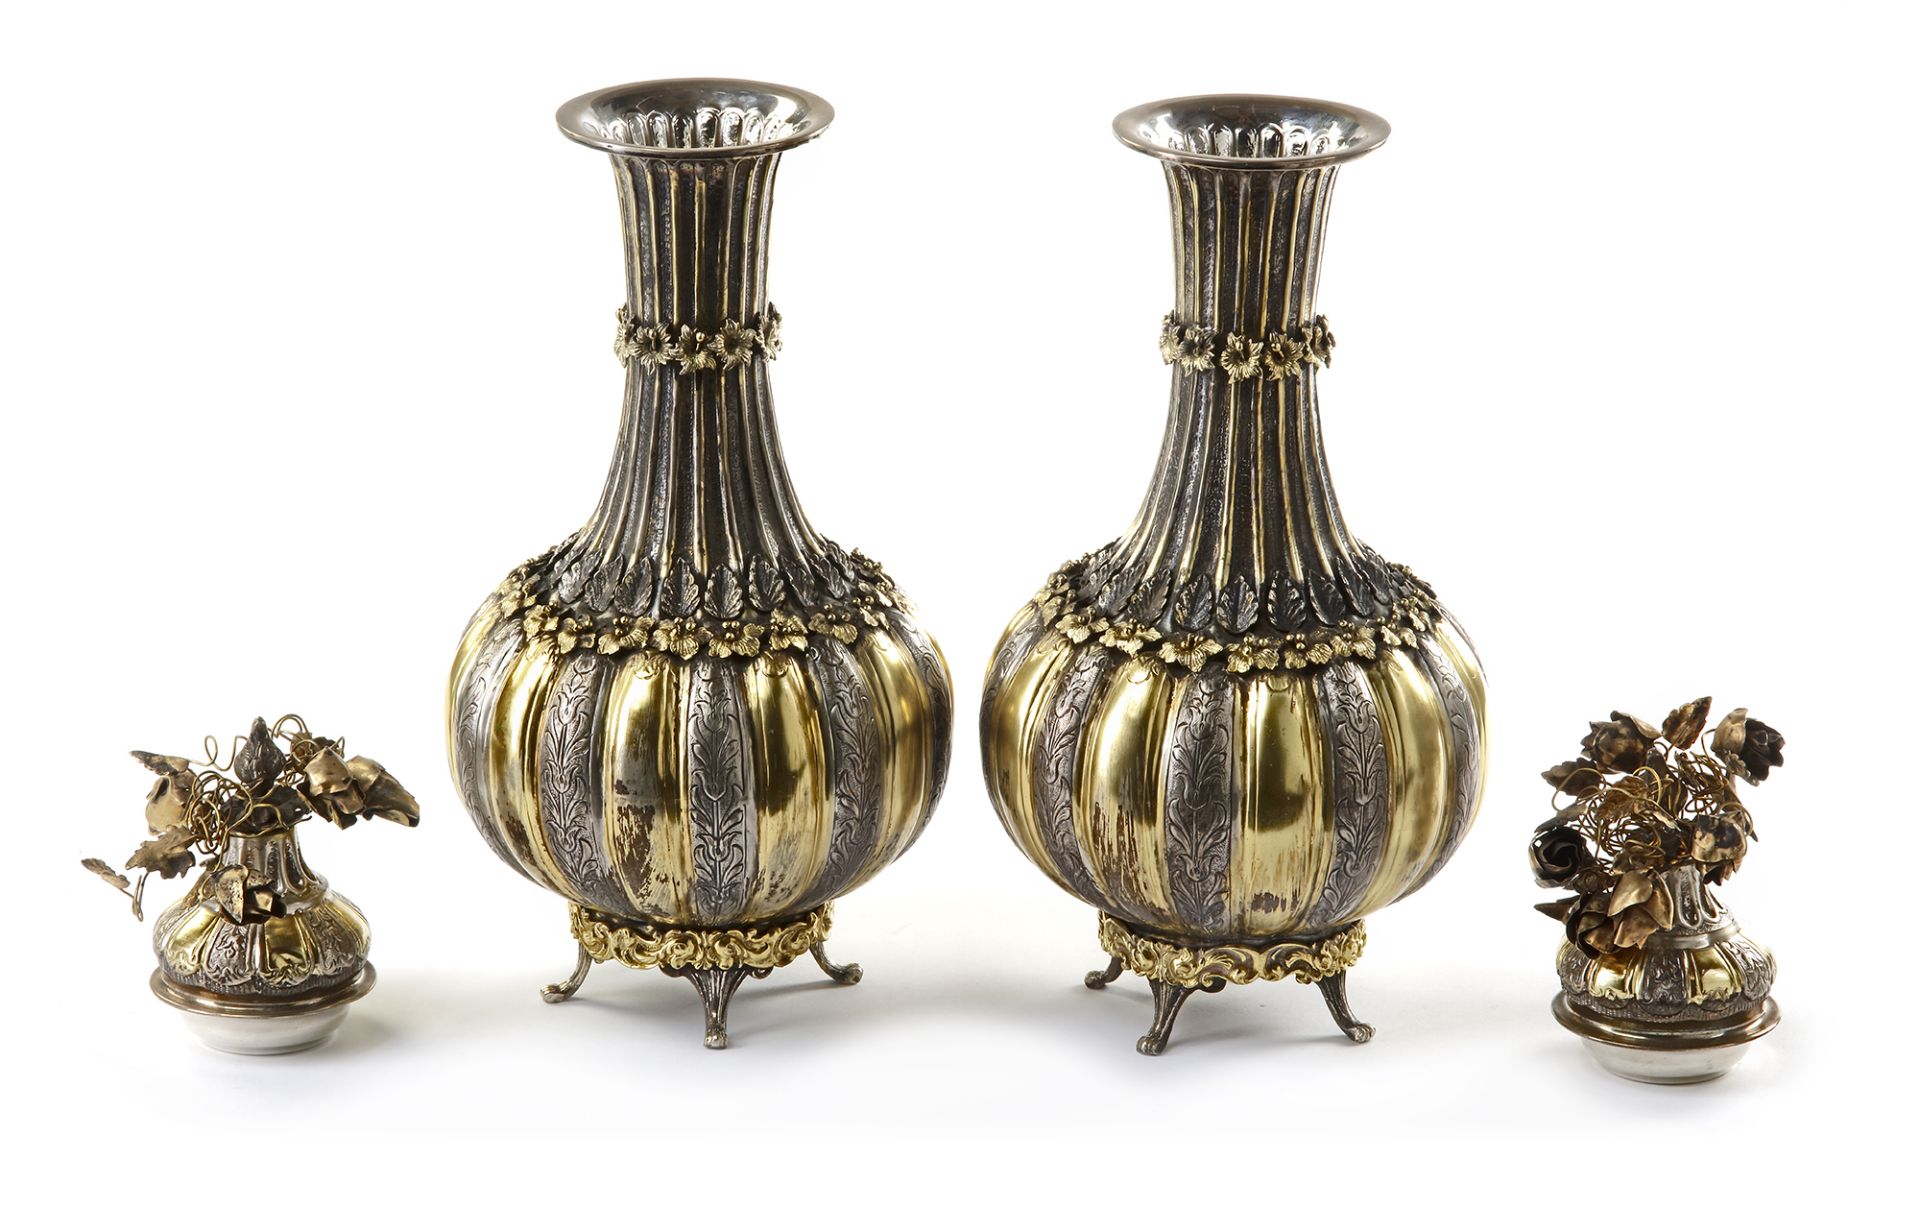 A PAIR OF GILT SILVER VASES WITH COVERS, TURKEY, 19TH CENTURY - Image 6 of 10